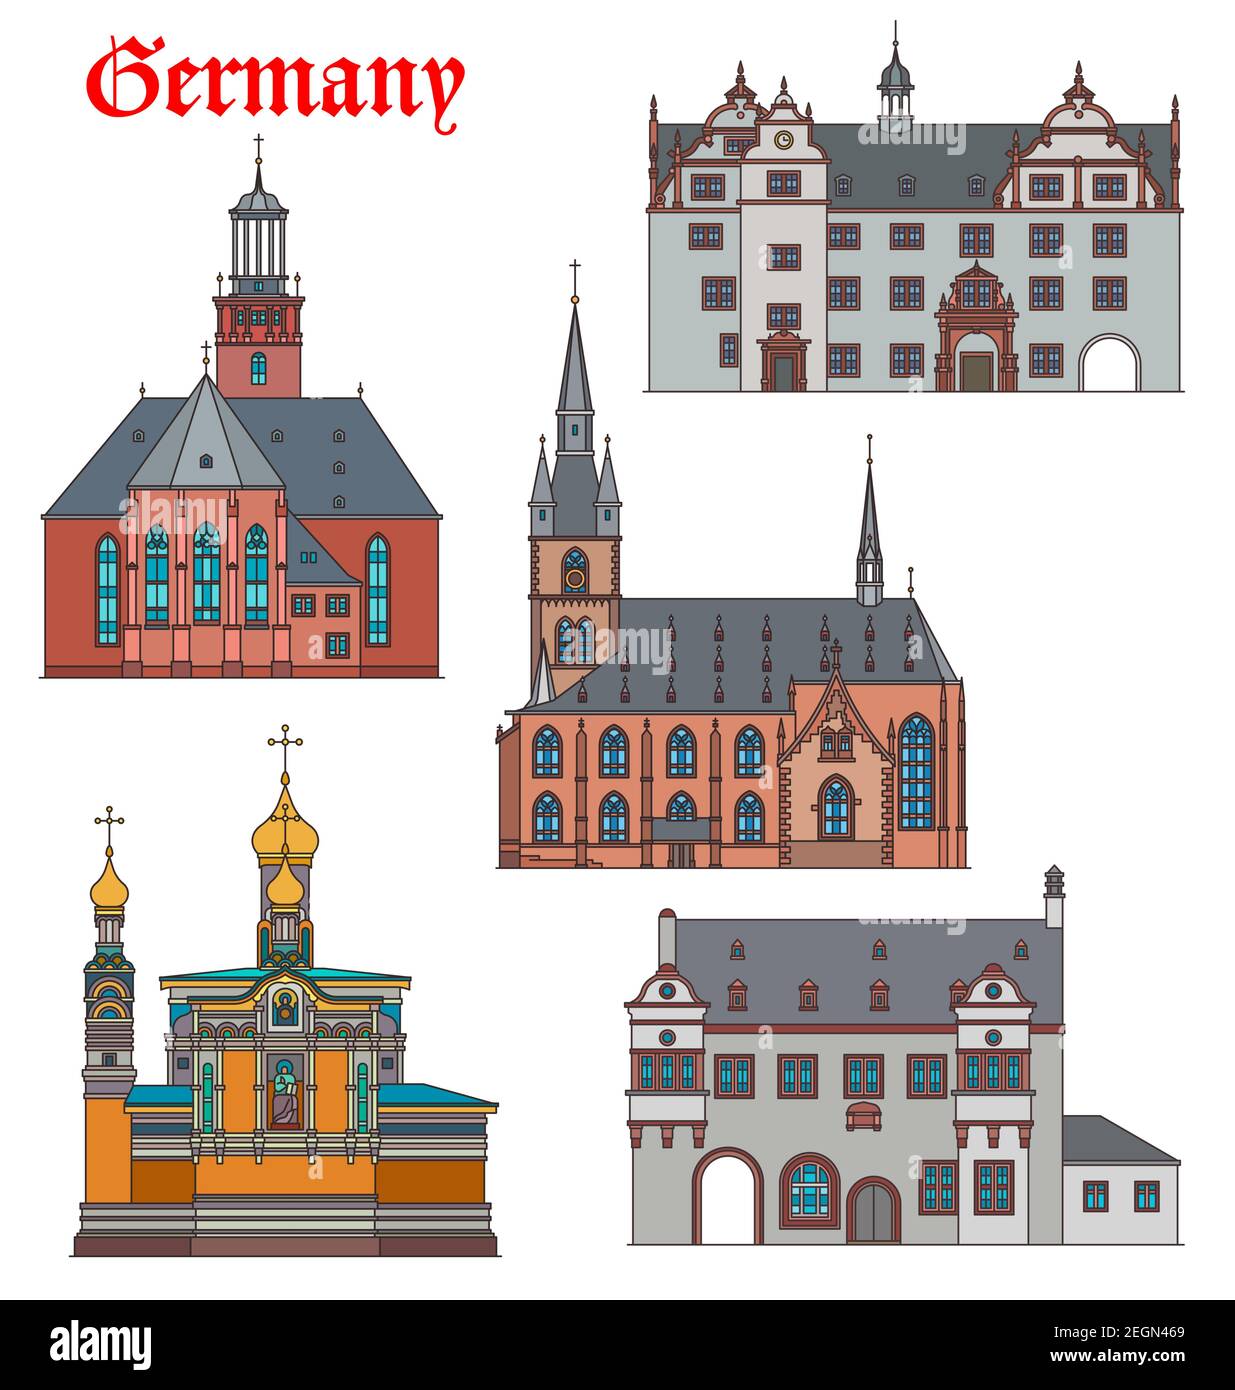 Germany landmarks, travel architecture and Darmstadt buildings, churches and cathedrals. German orthodox St Maria Magdalena kirche, Rathause town hall Stock Vector